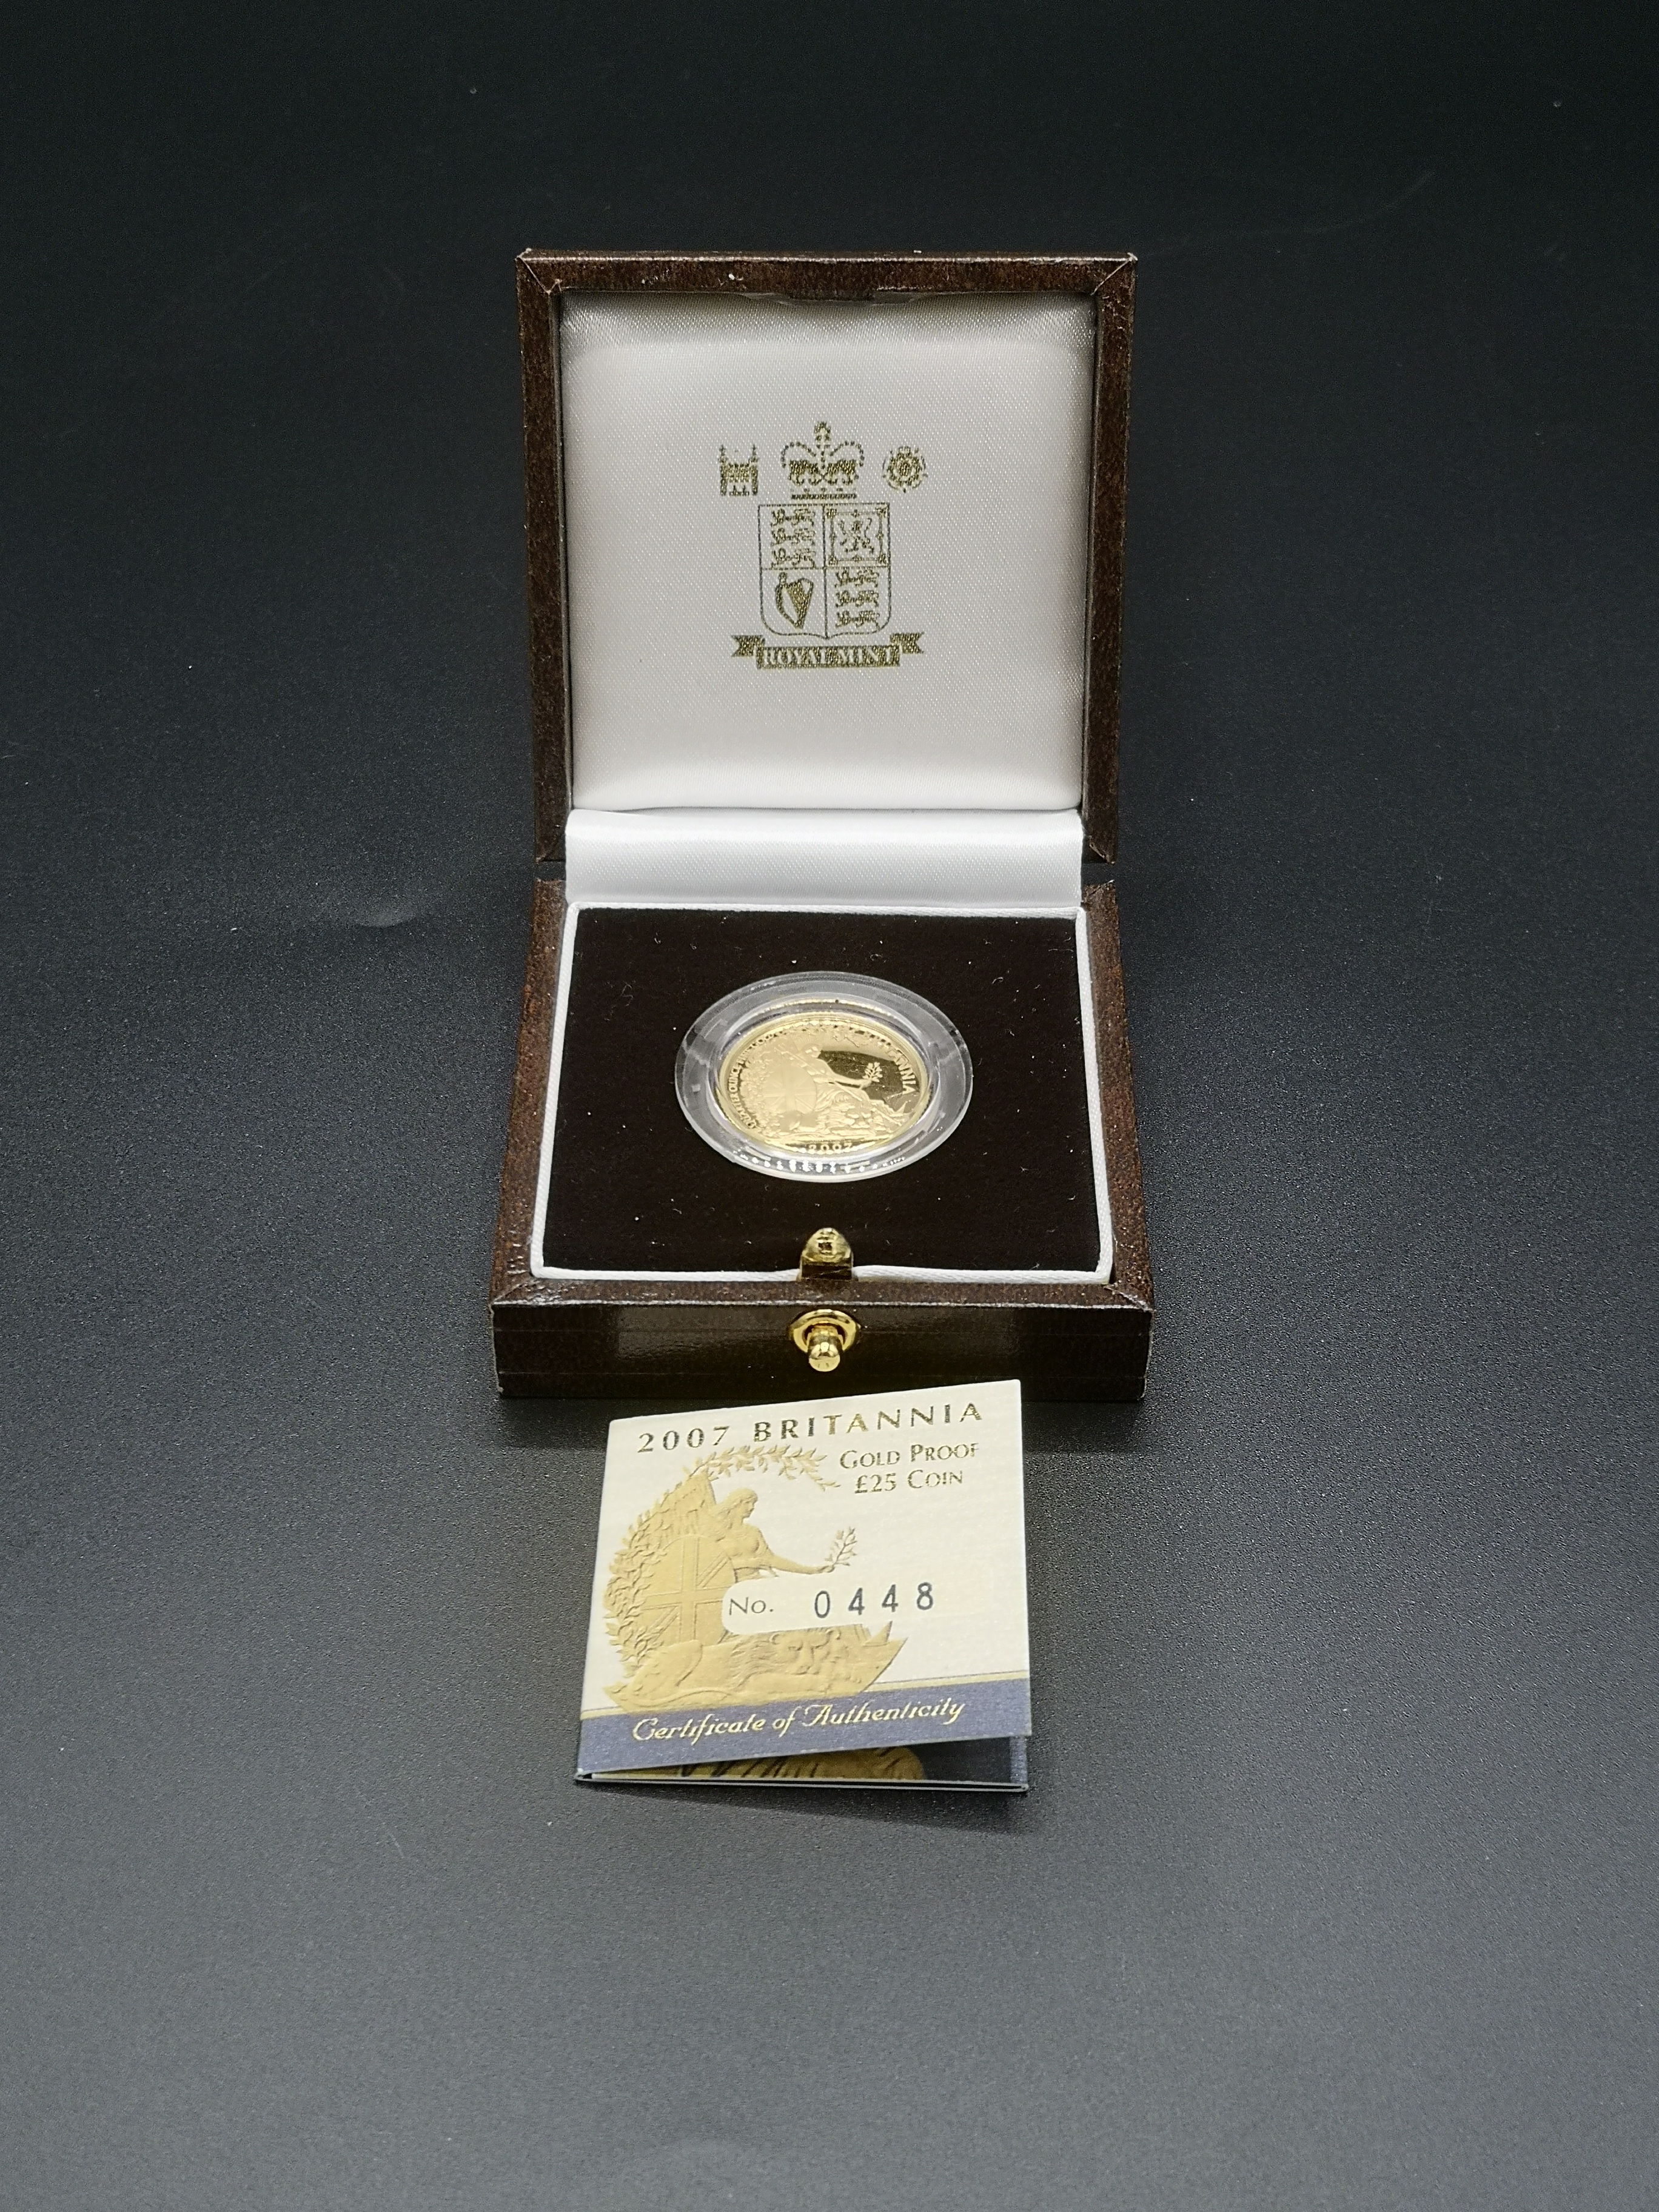 2007 1/4oz gold proof £25 coin